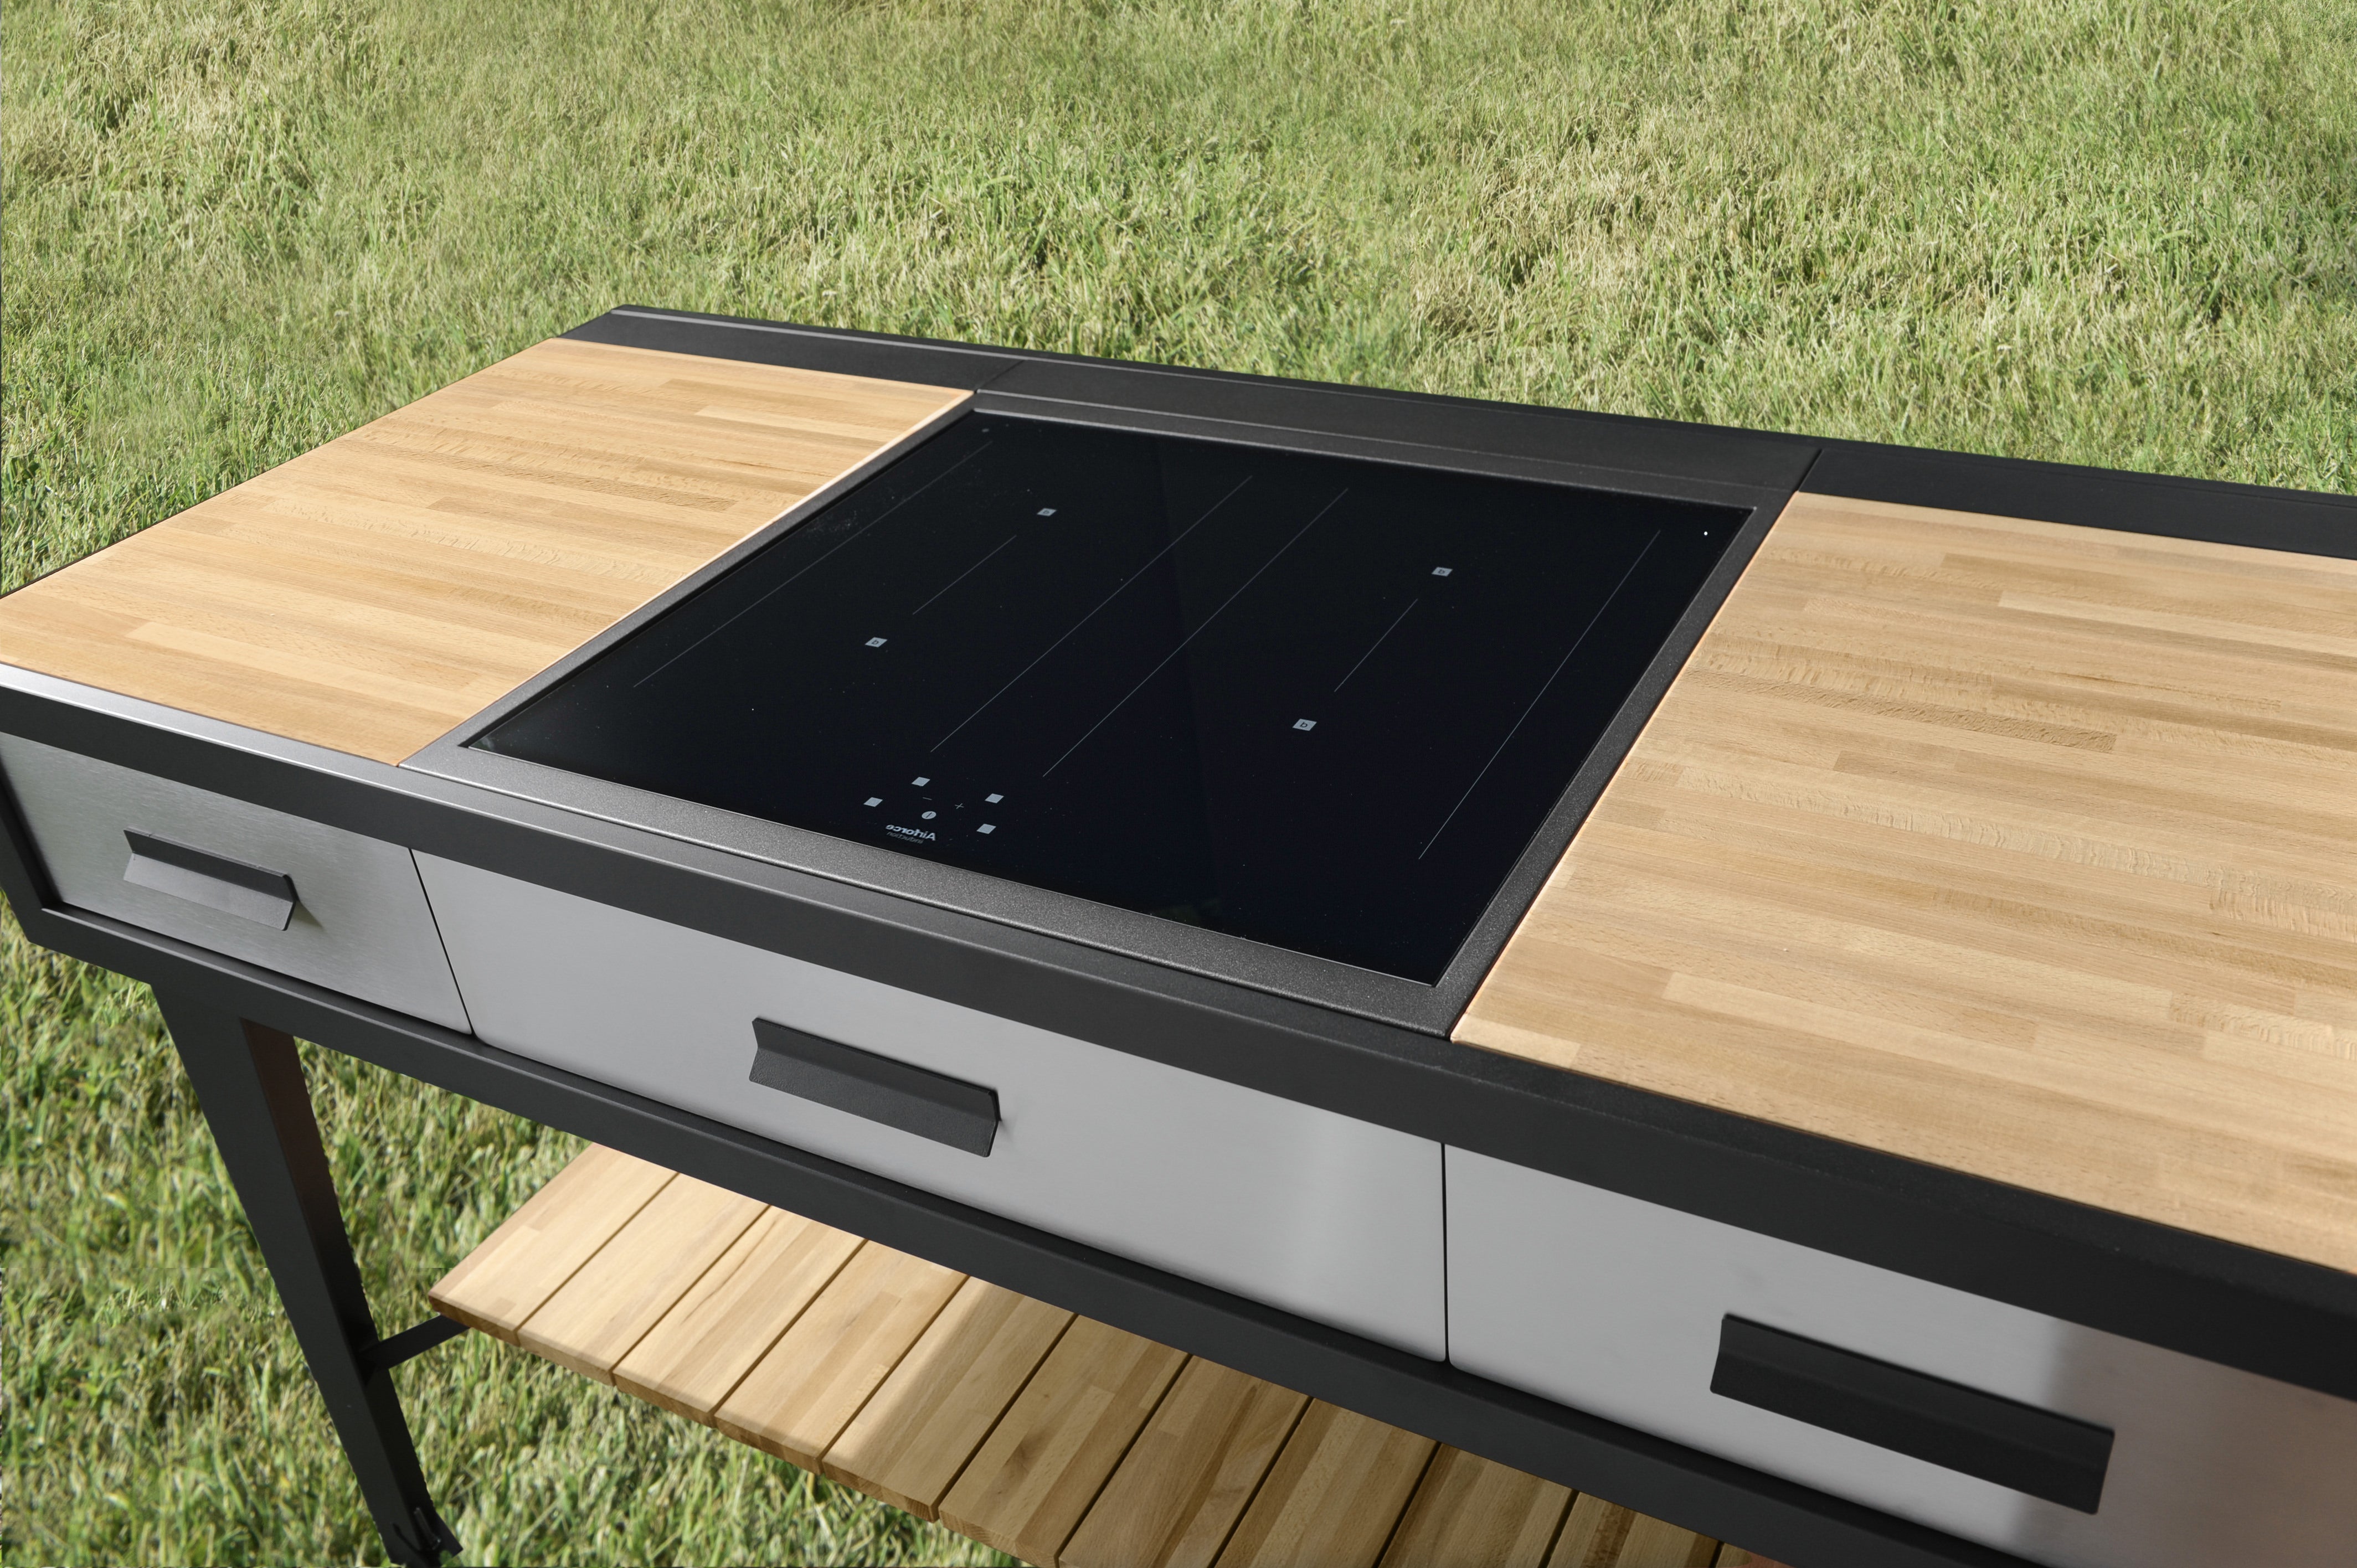 Airforce E-Cook 150cm BBQ Luxury Outdoor Cooking With a 58cm Induction Hob - Devine Distribution Ltd